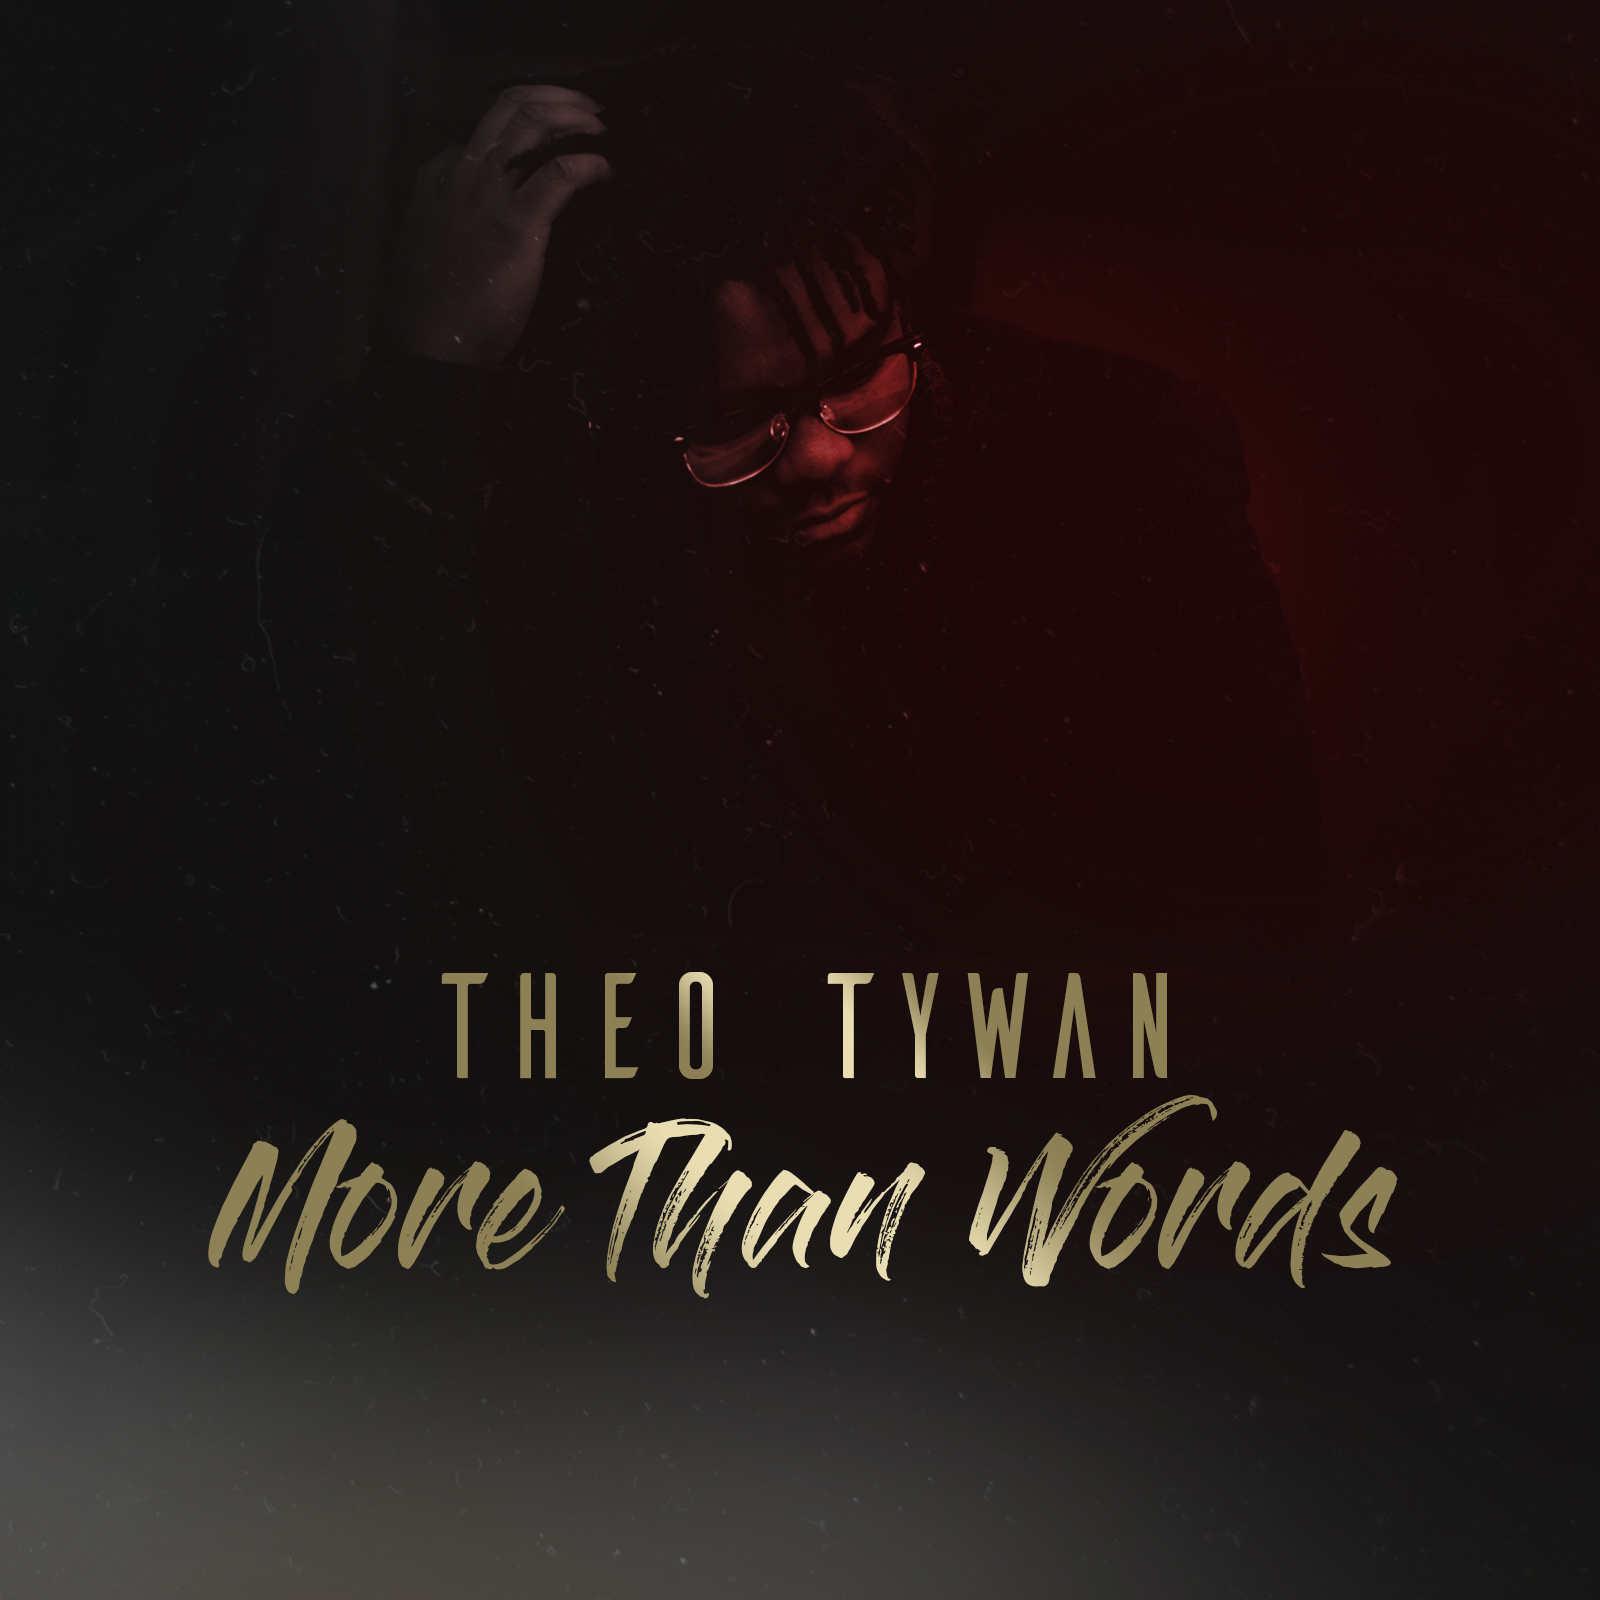 Stream Theo Tywan’s More Than Words EP